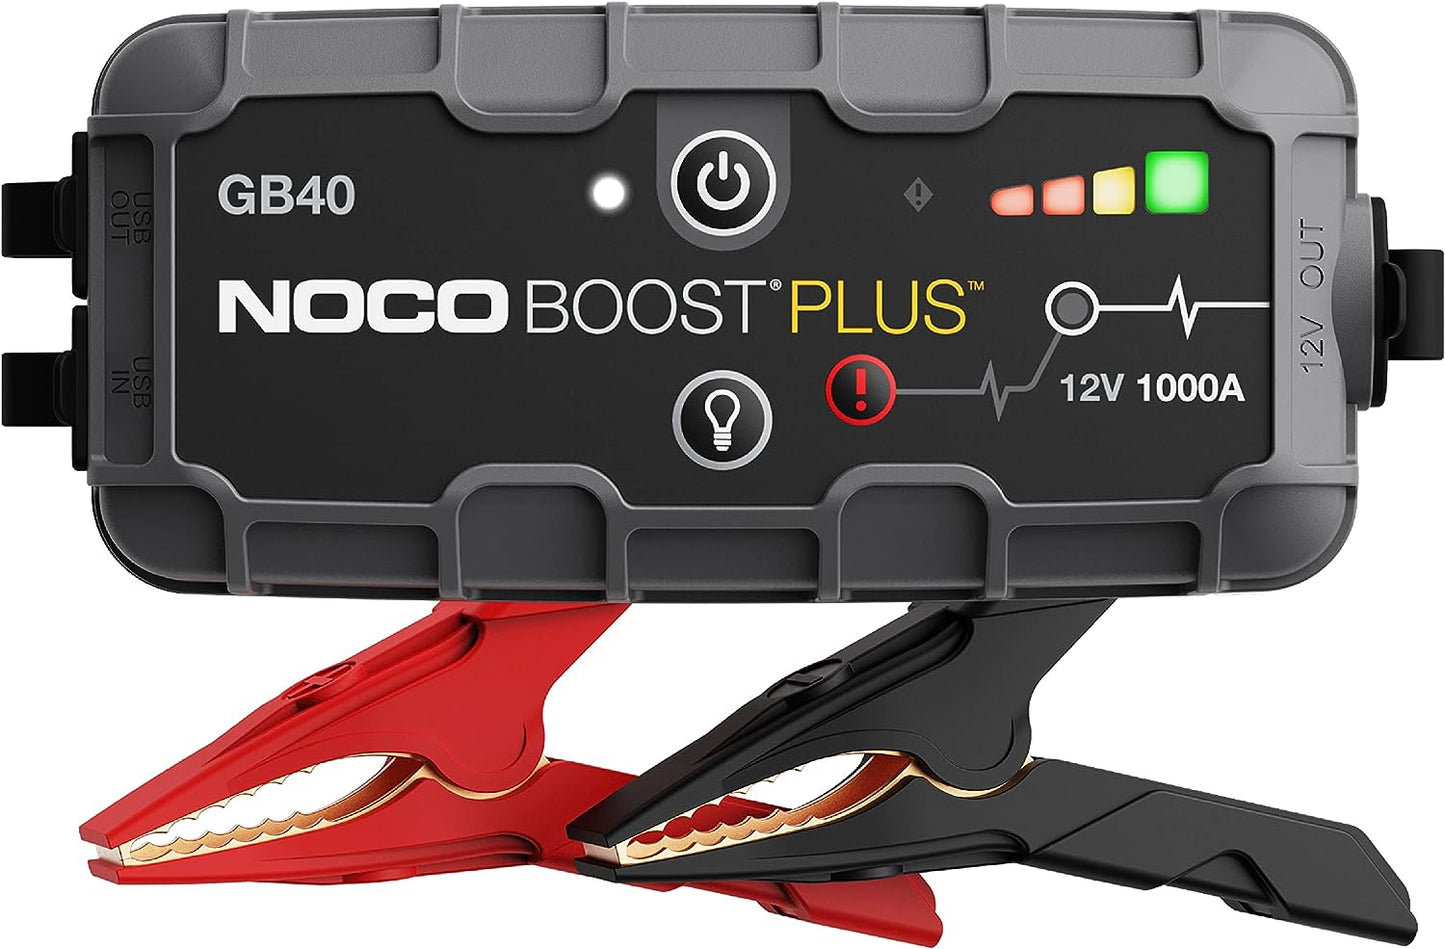 UniitesMarketplace.com™, NOCO Boost Plus GB40 1000A UltraSafe Car Battery Jump Starter, 12V Battery Pack, Battery Booster, Jump Box, Portable Charger and Jumper Cables for 6.0L Gasoline and 3.0L Diesel Engines, $99.91